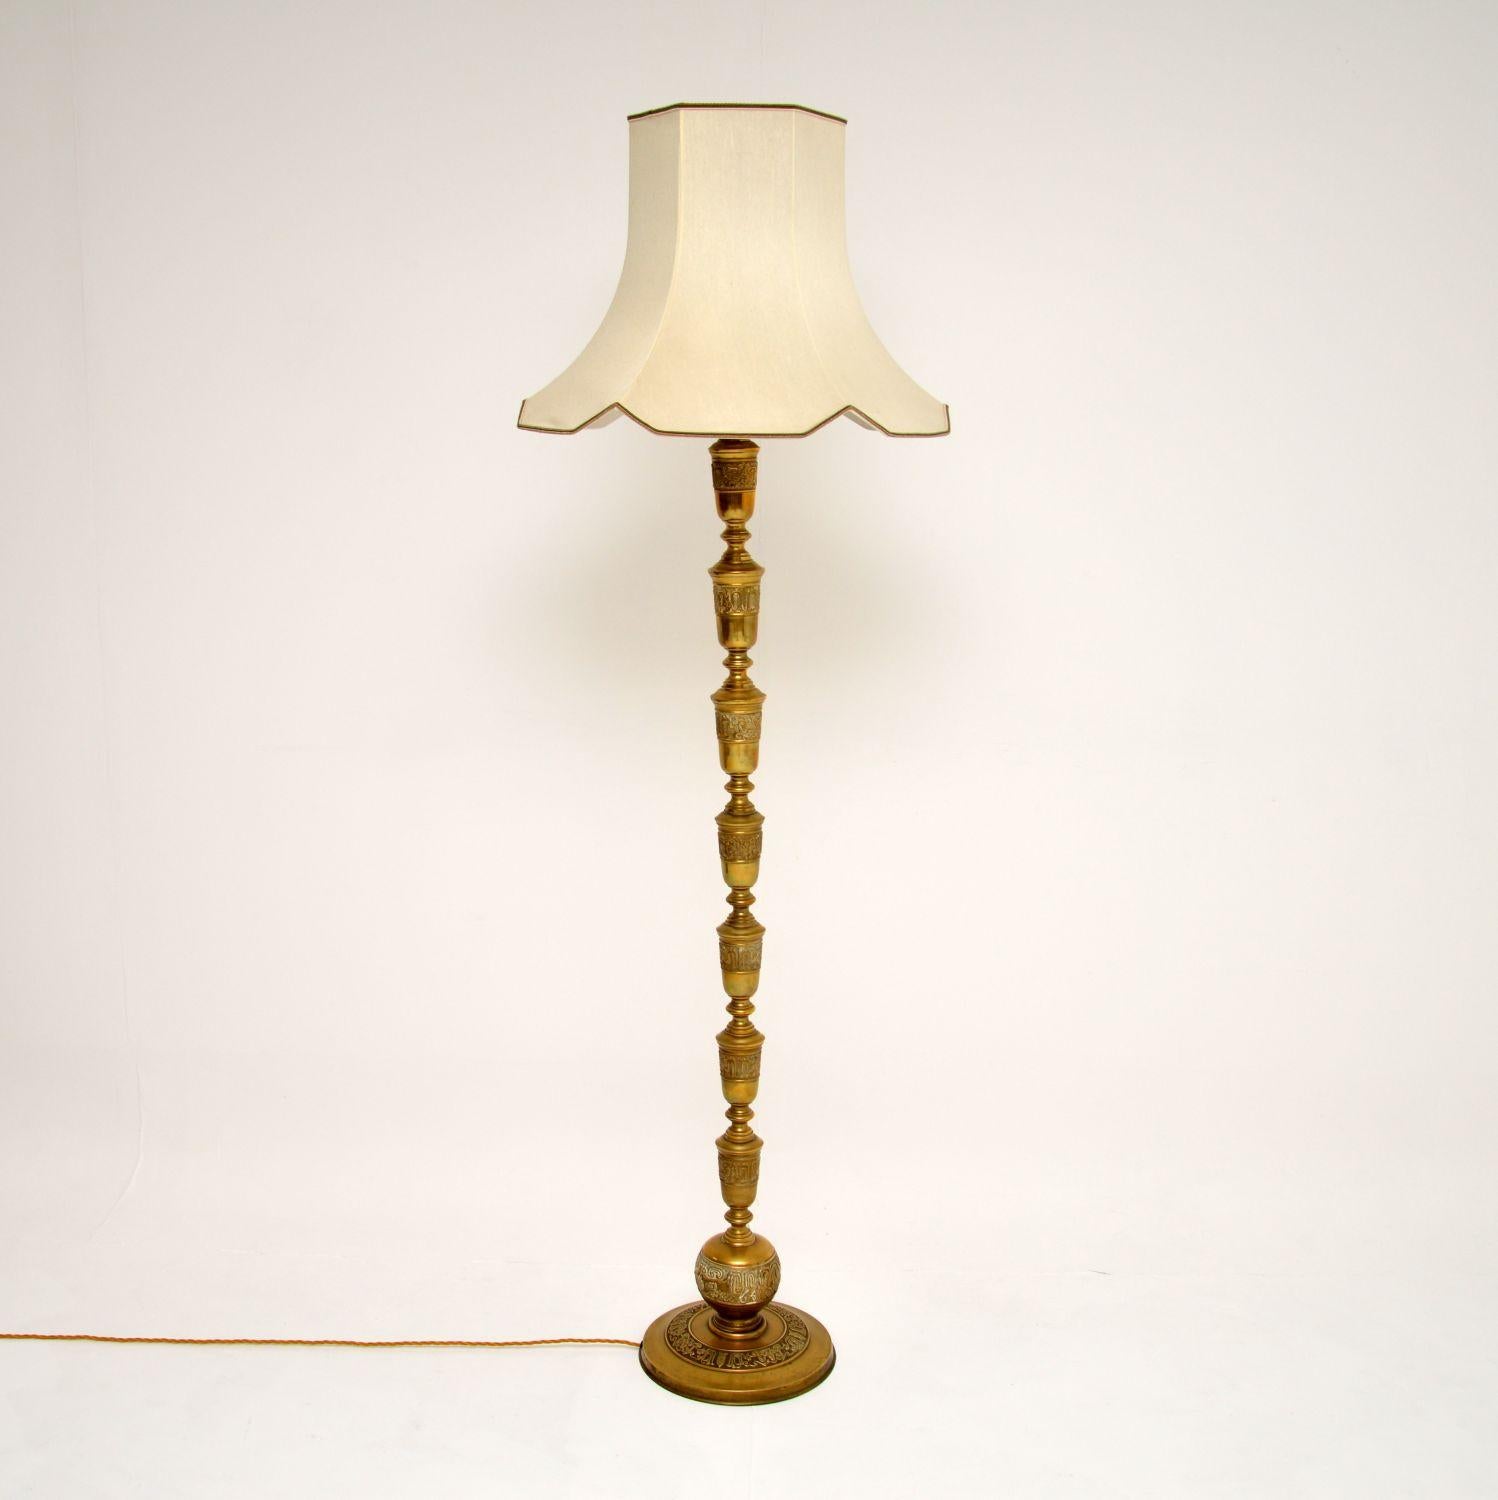 A wonderful antique vintage floor lamp in solid brass, with a Moorish influence & dating from the 1920-30’s.

The quality is amazing and this has a gorgeous design, with fabulous details throughout. The brass has a lovely patina, with just the